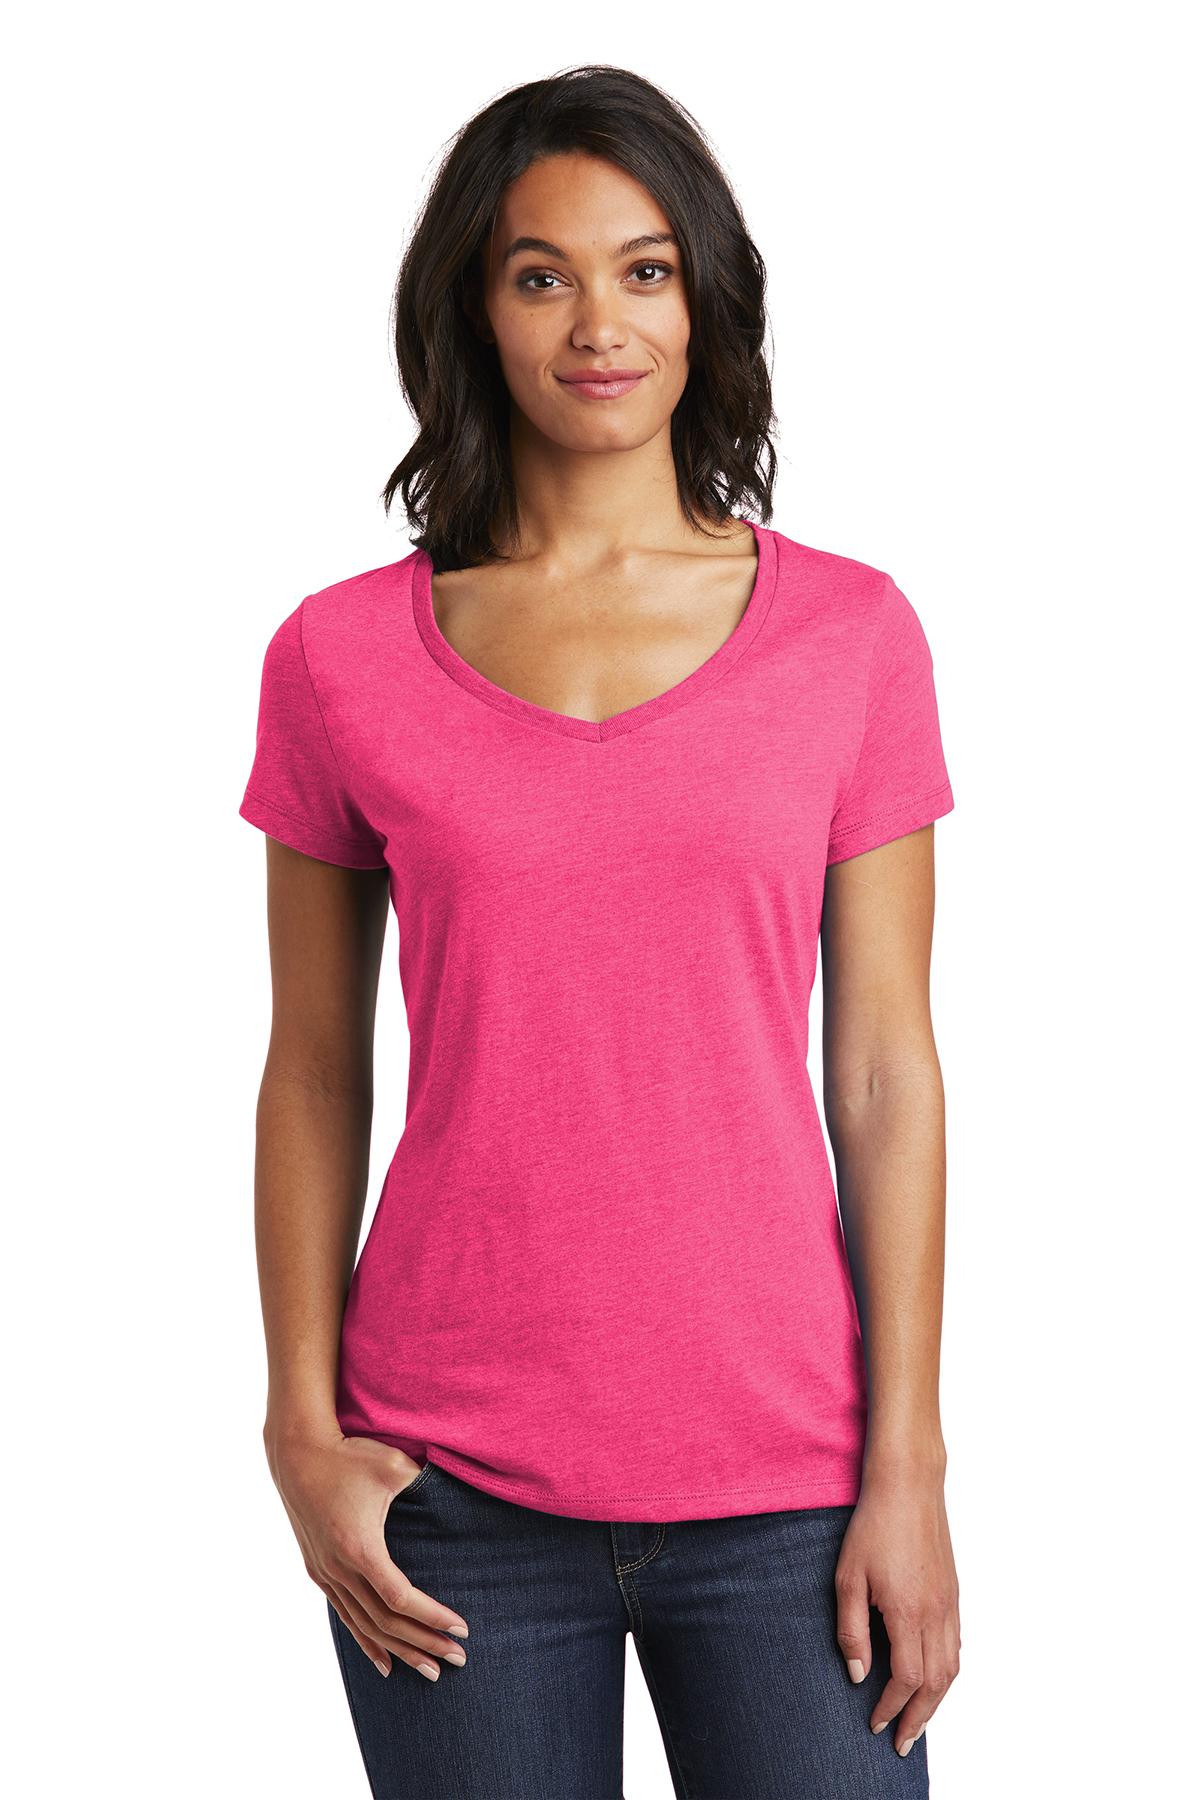 District DT6503 - Women's Very Important Tee V-Neck $6.45 - T-Shirts